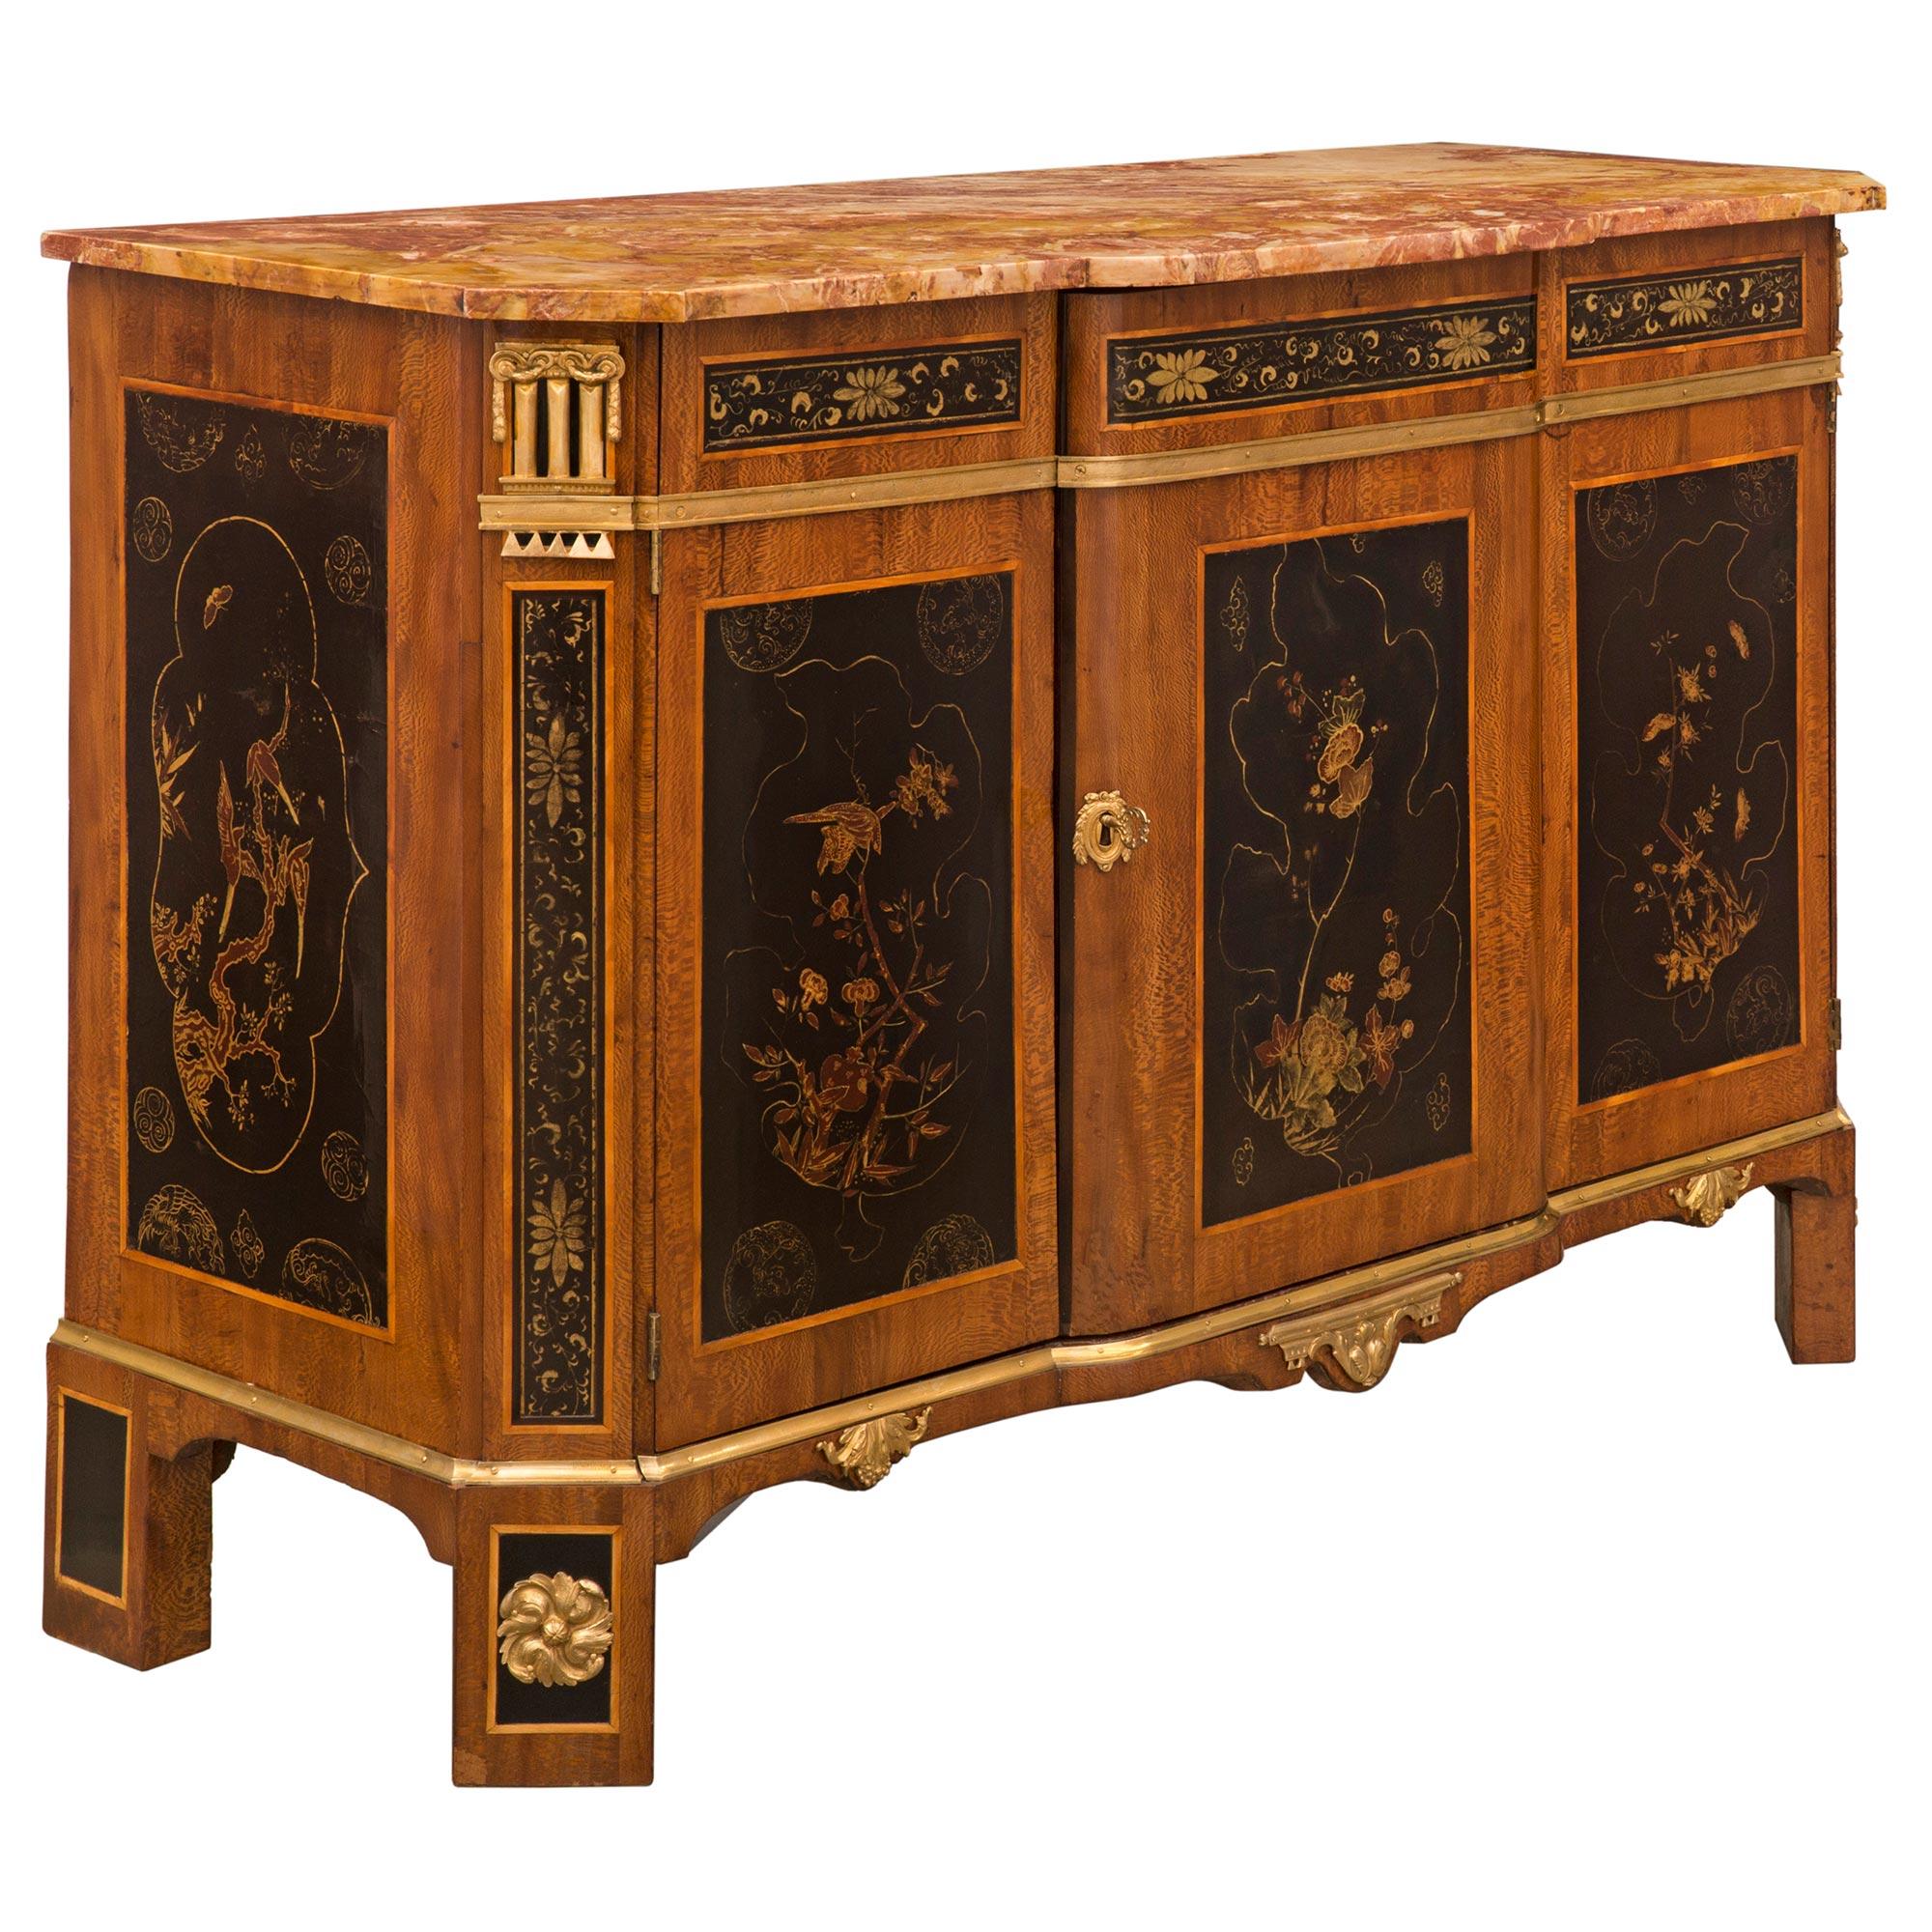 Louis XVI Italian 18th Century Japanese Lacquer and Lace Wood Veneer Cabinet For Sale